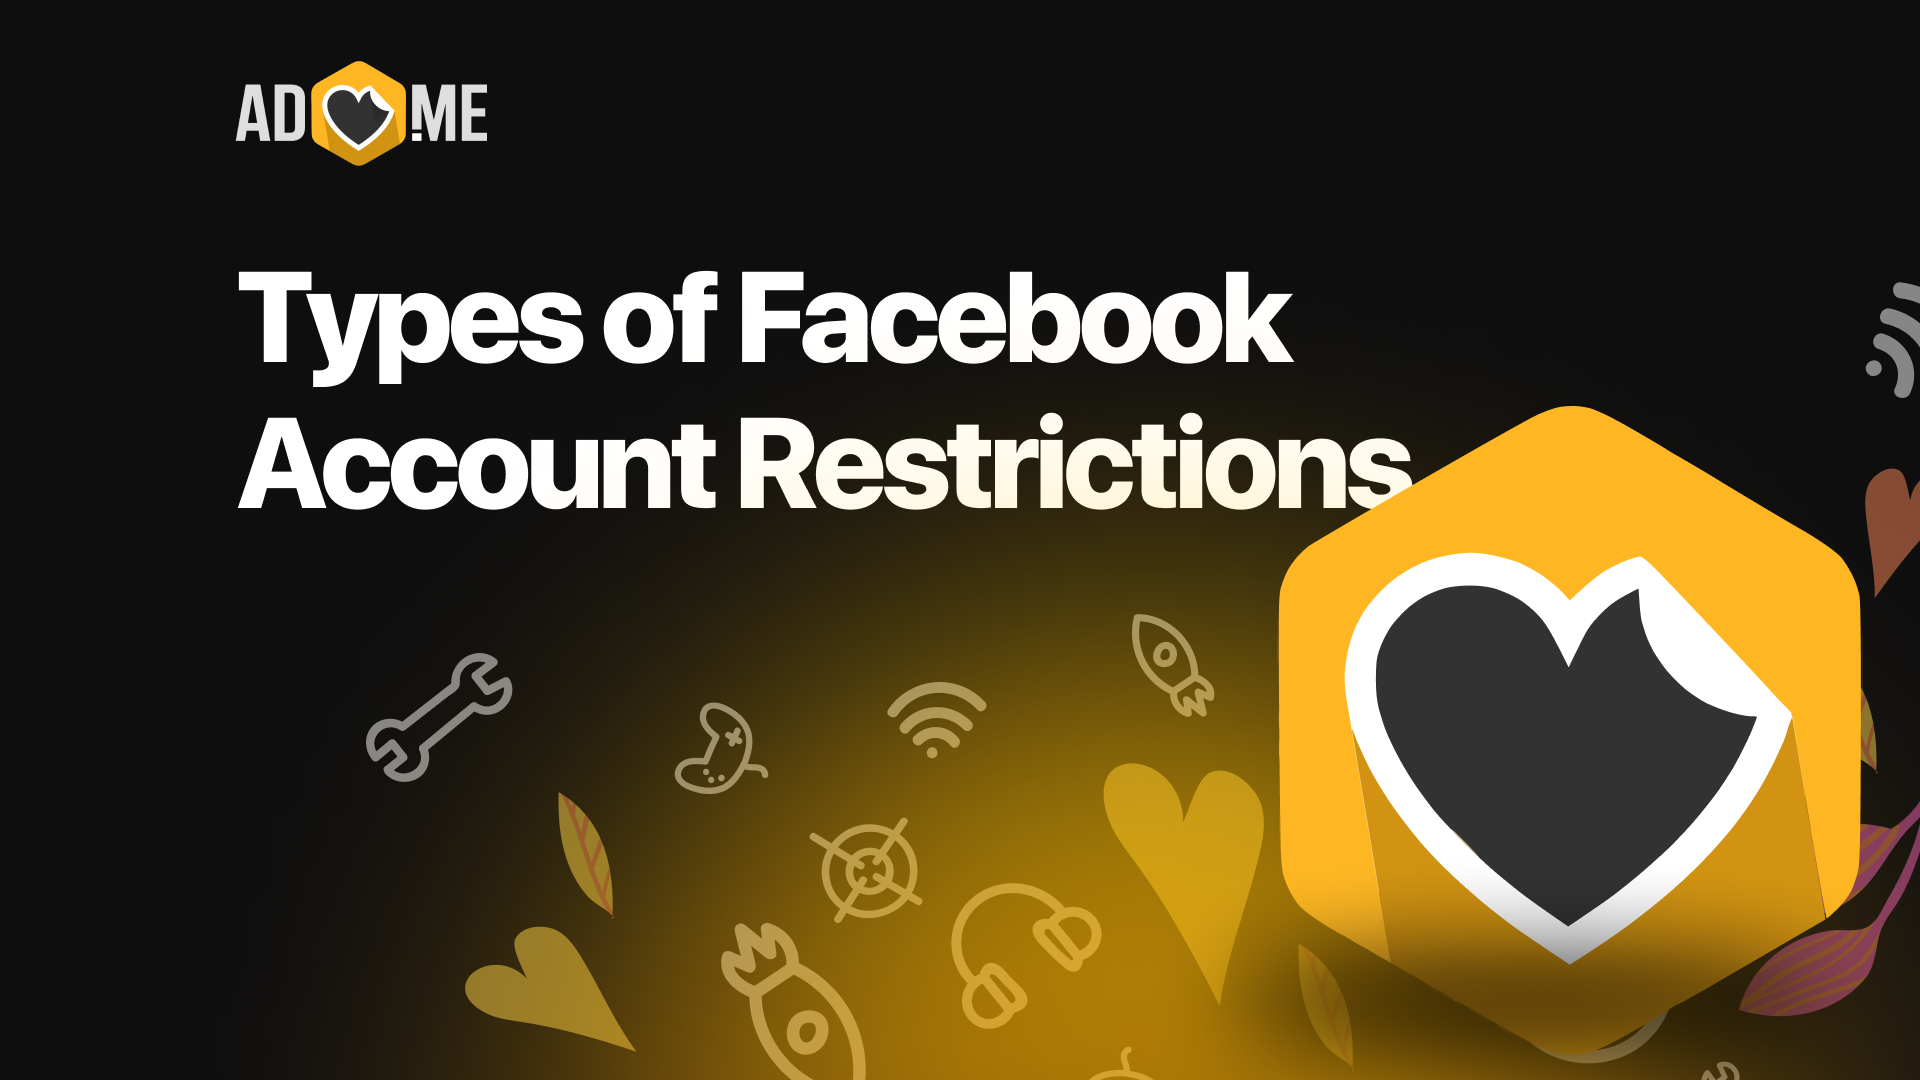 Types of Facebook Account Restrictions